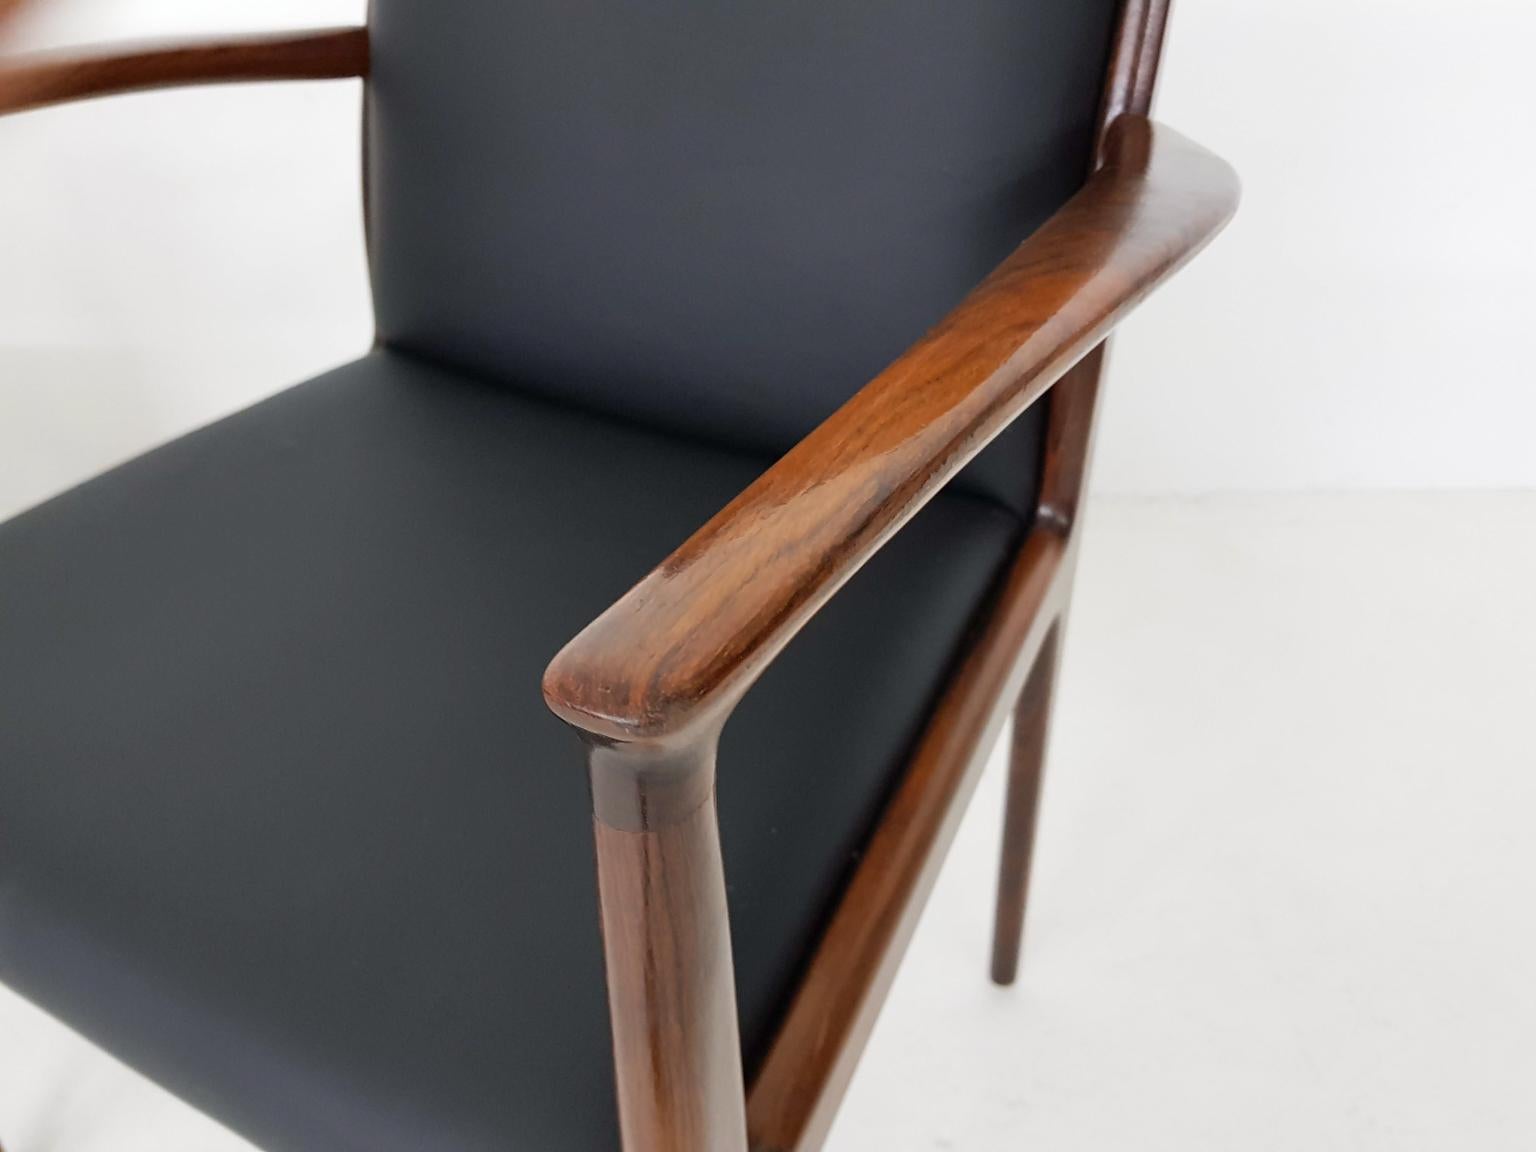 Set of 4 Rosewood and Black Leather Dining Chairs, Danish Modern, 1950s In Good Condition For Sale In Amsterdam, NL